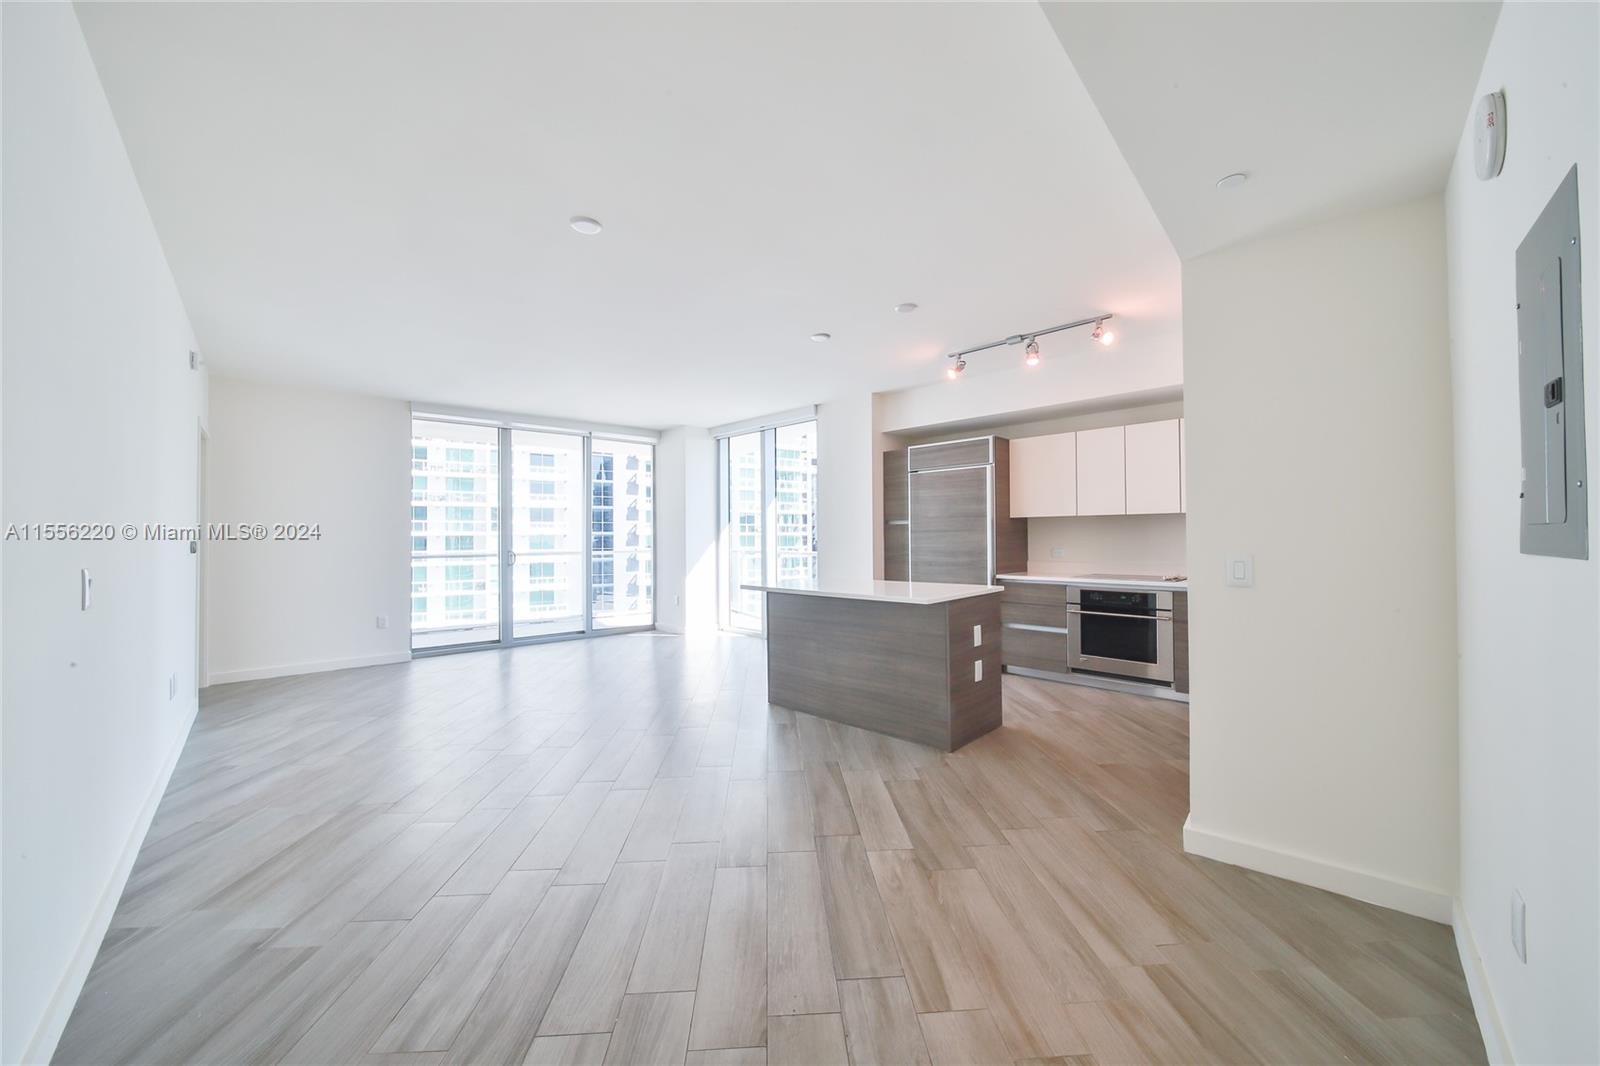 Bright 2 Bed / 2 Bath corner unit in Millecento Brickell. Features include beautiful porcelain floors, custom closets & blackout shades, Italian cabinetry and stainless steel appliances. Facing southeast, enjoy an open skyline view from the large wraparound balcony. Includes 1 assigned parking on 2nd floor! Wifi included. 5 star amenities: Rooftop pool, larger pool on 9th Fl, gym, kids room, lounge room, theatre. Enjoy the Brickell lifestyle - centrally located to restaurants, shops, supermarkets, Mary Brickell Village, Brickell City Centre, Metrorail & Metro mover. Available May 28, 2024.